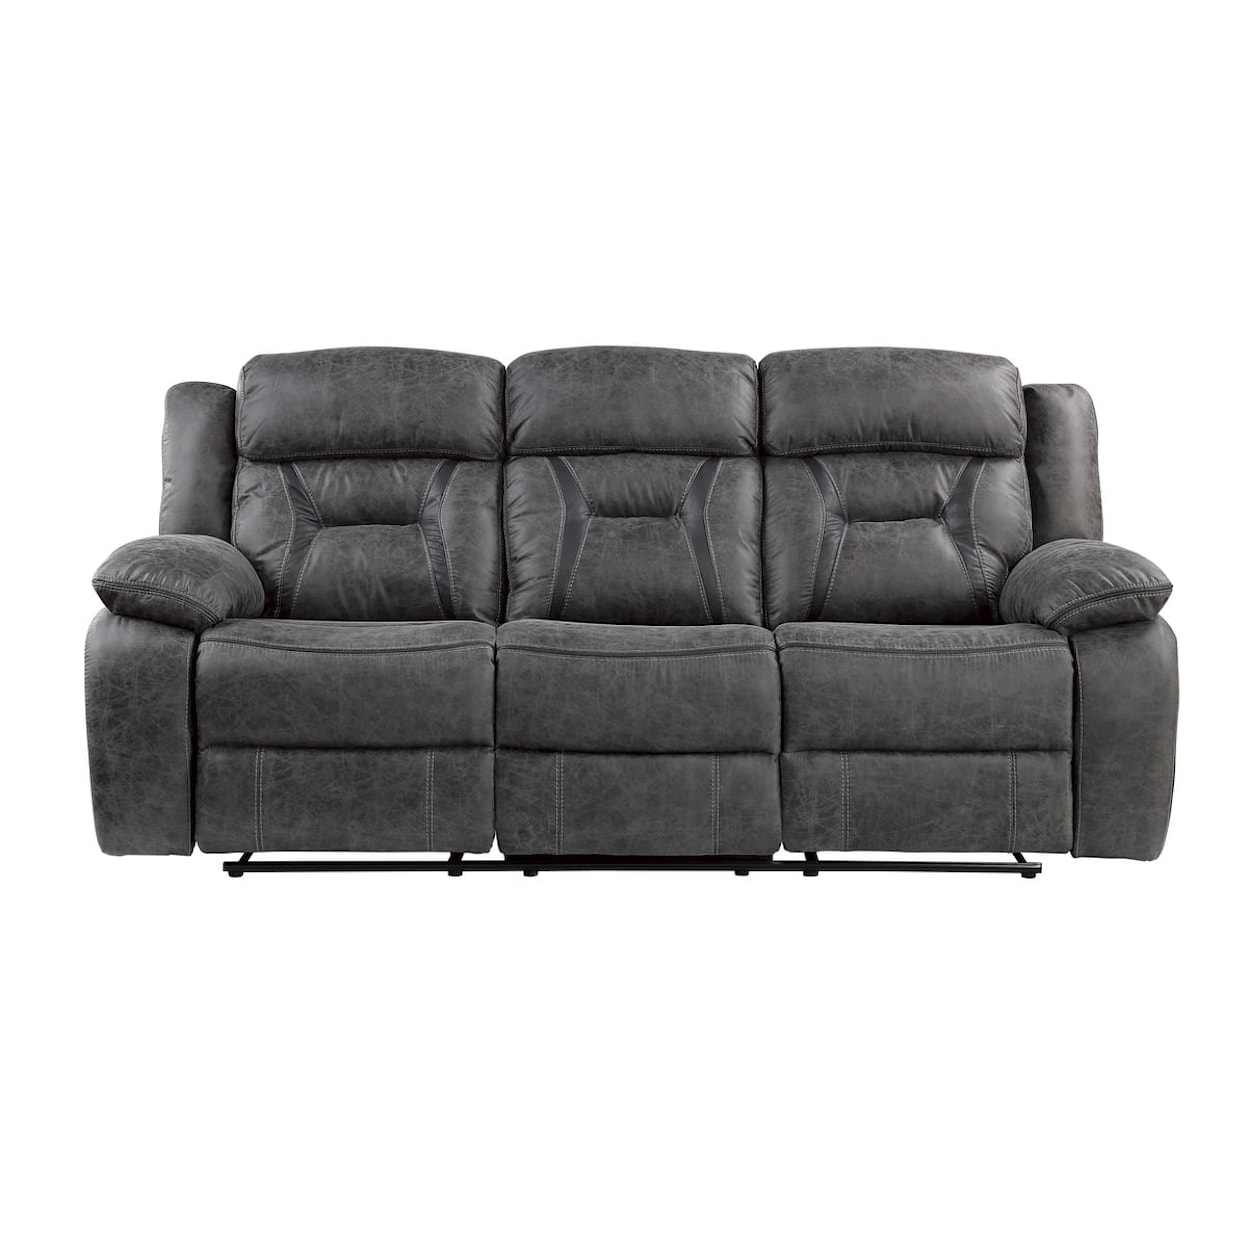 Homelegance Furniture Madrona Hill Double Reclining Sofa